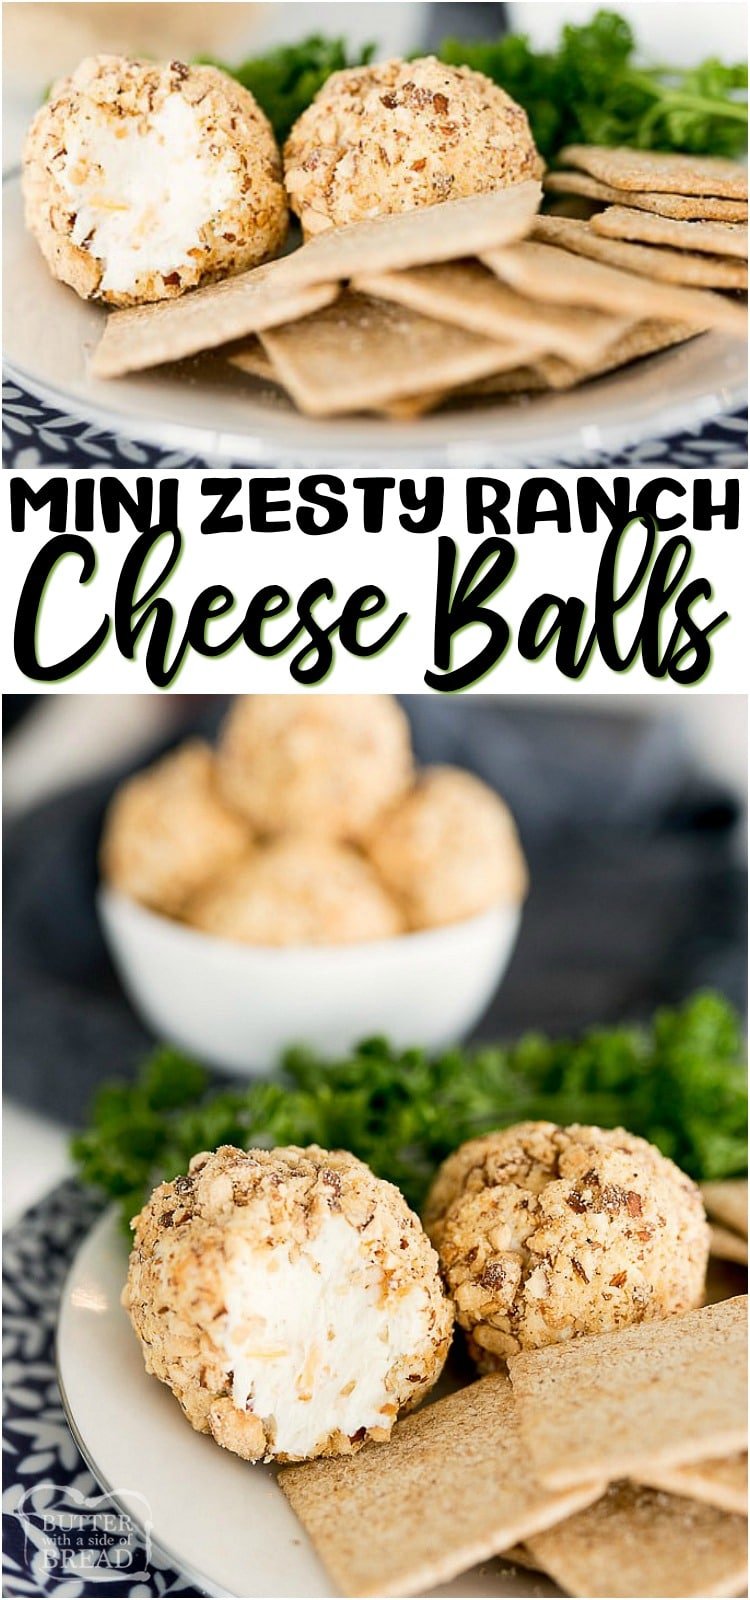 Mini Cheese Balls are everything you love about an ordinary Cheese Ball, only personal sized! The zesty ranch cream cheese ball recipe smeared on a crunchy cracker is the best appetizer around.